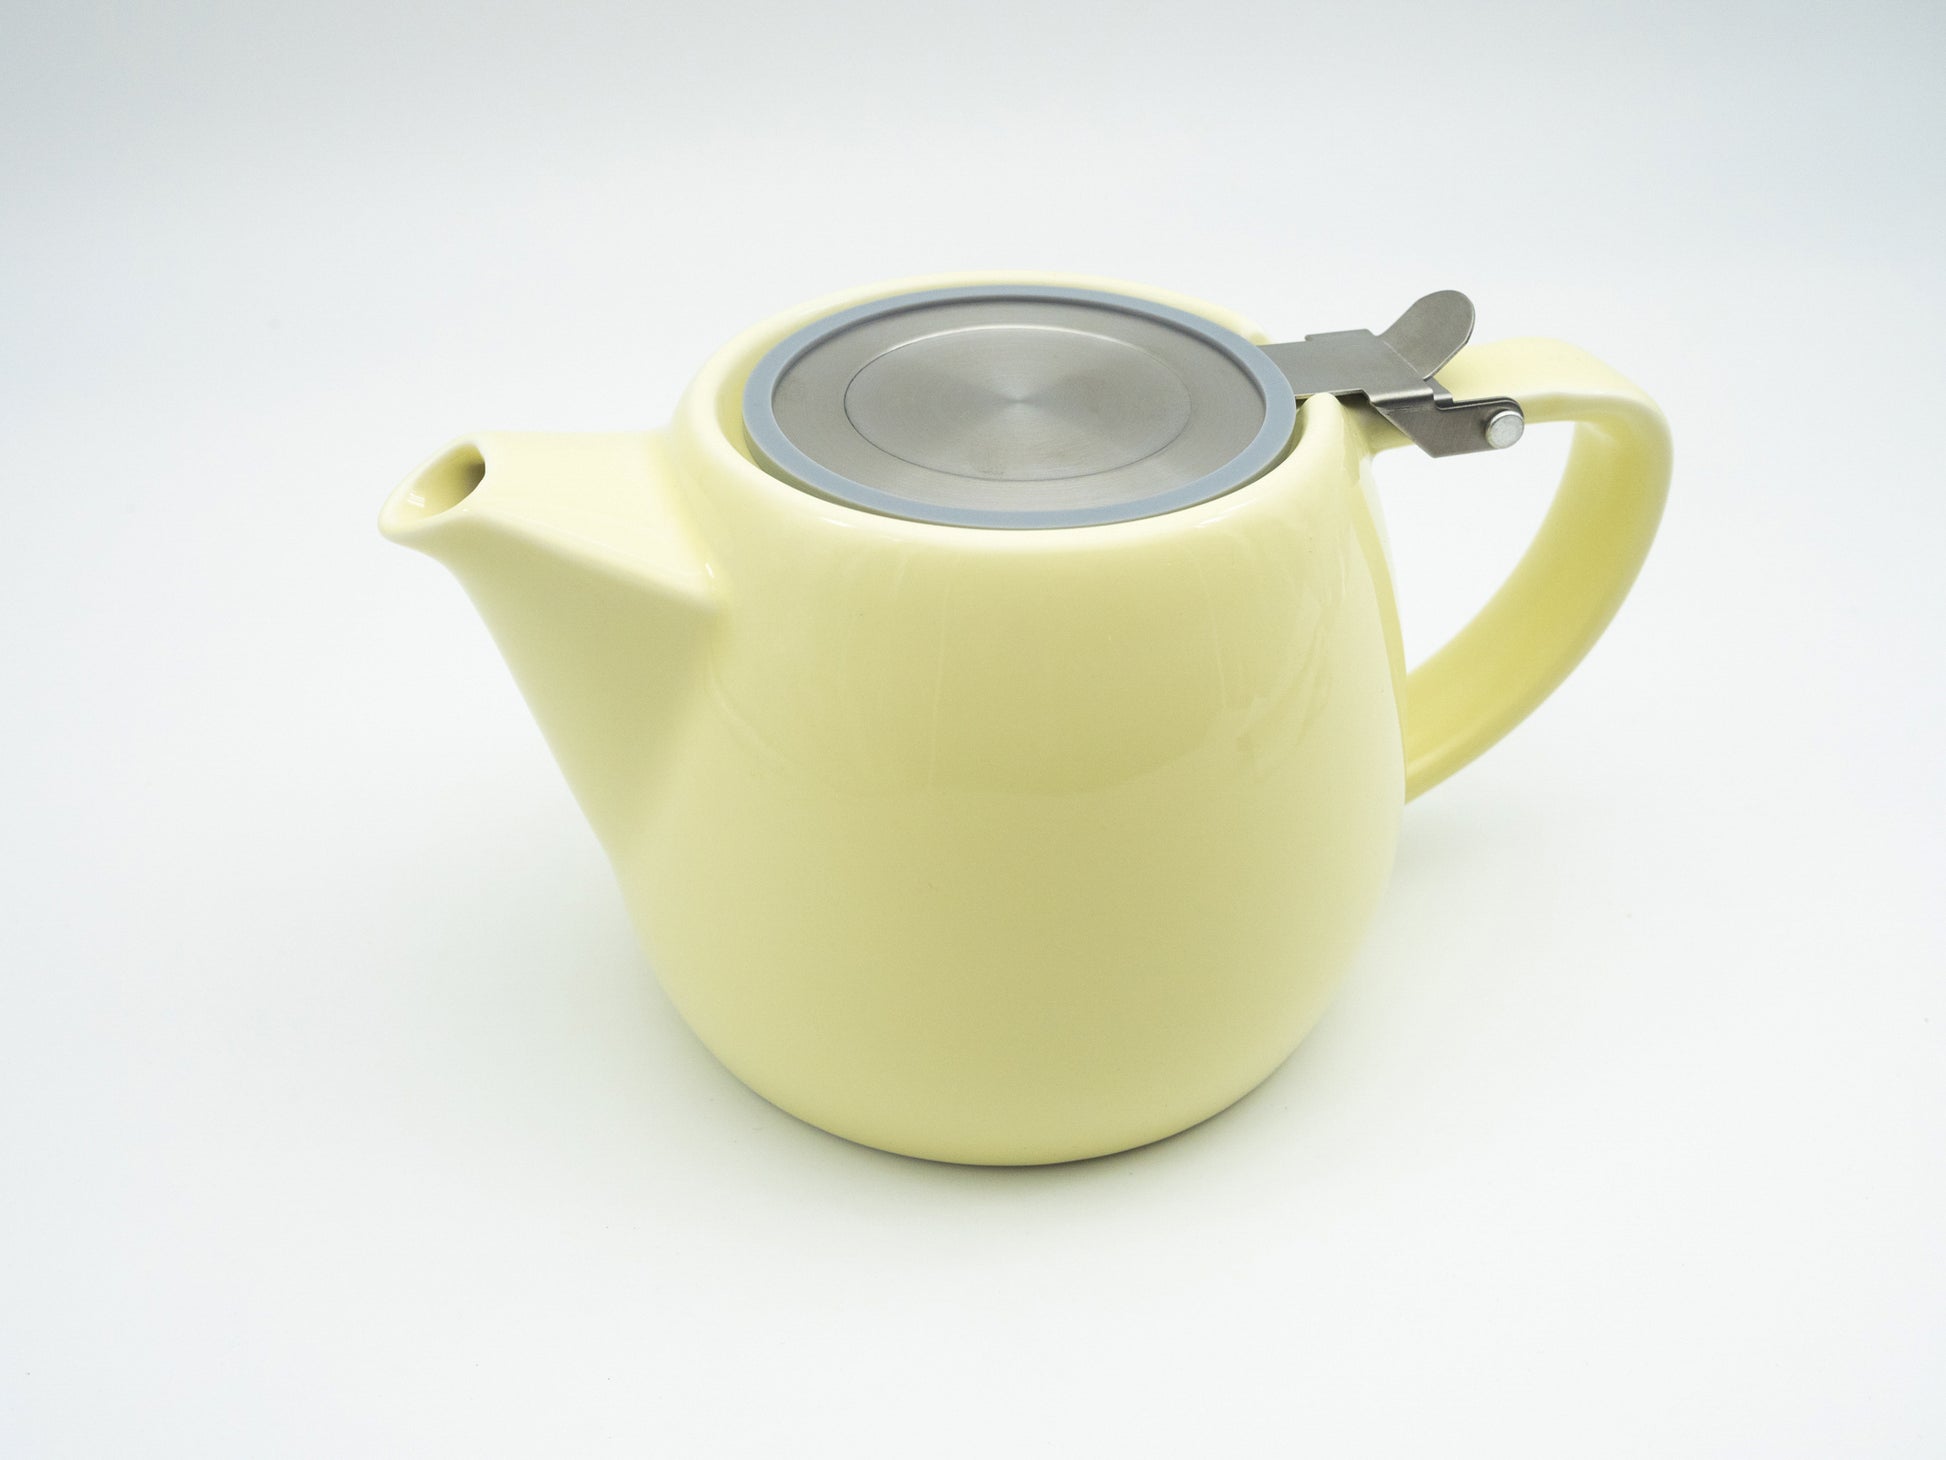 Vanilla porcelain stump tea pot with stainless steel lid and infuser basket